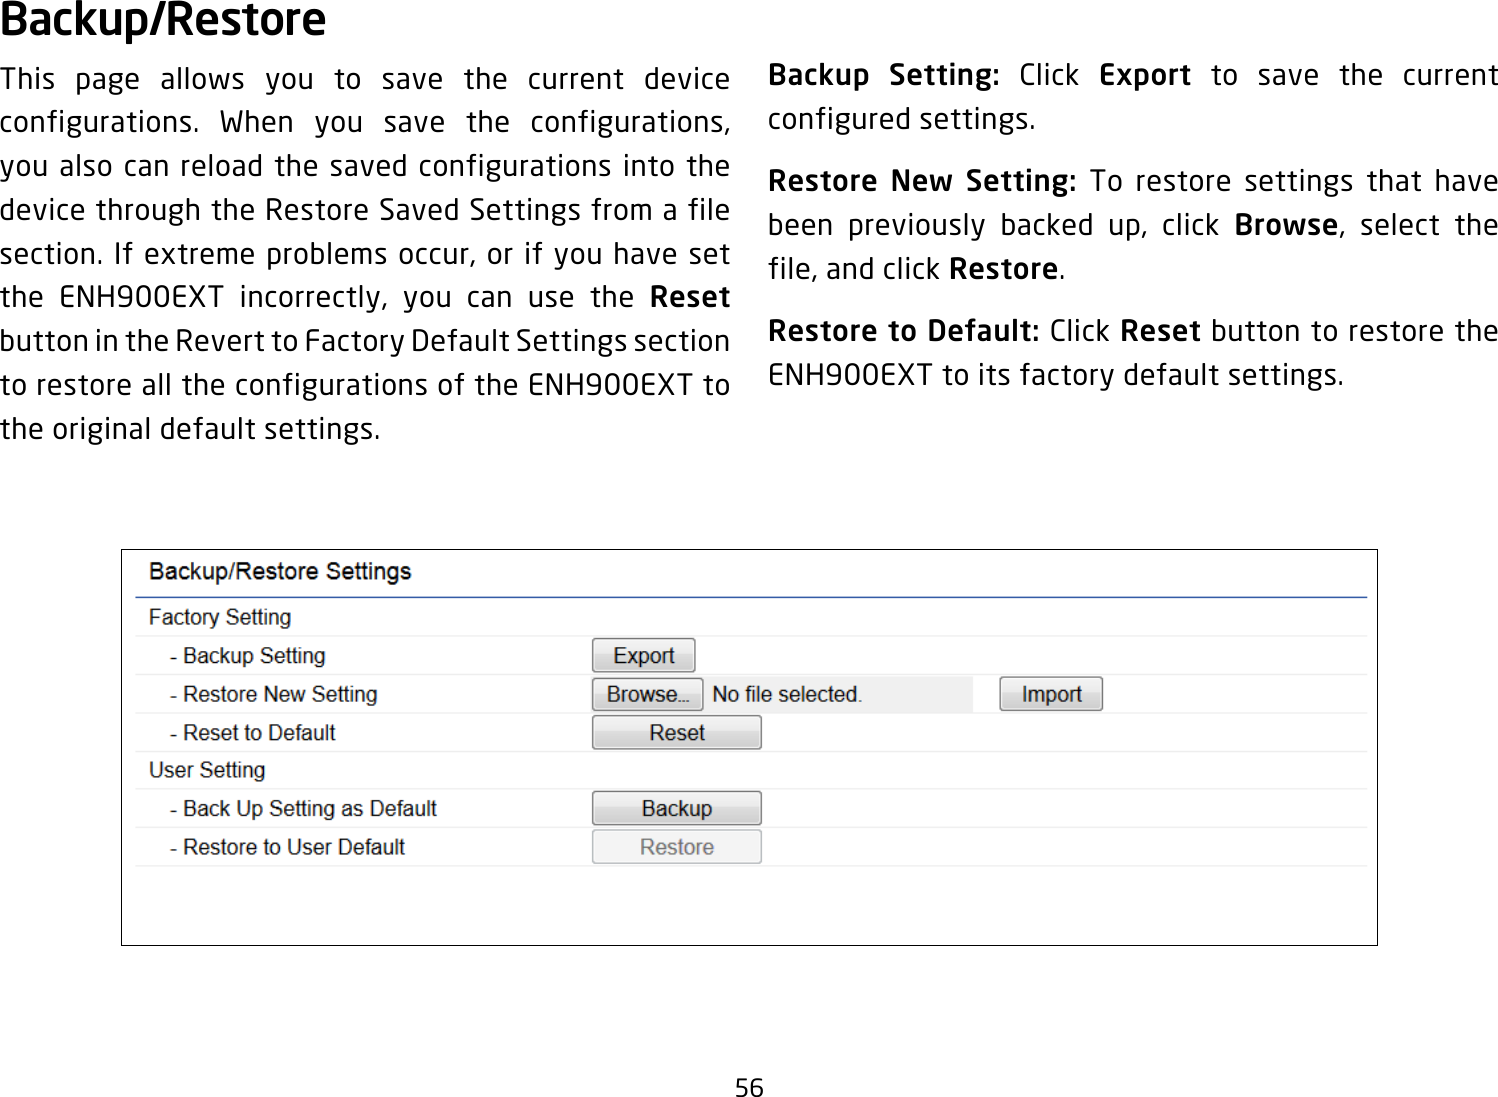 56Backup/RestoreThis page allows you to save the current device configurations. When you save the configurations, you also can reload the saved configurations into the device through the Restore Saved Settings from a file section. If extreme problems occur, or if you have set the ENH900EXT incorrectly, you can use the Reset button in the Revert to Factory Default Settings section to restore all the configurations of the ENH900EXT to the original default settings.Backup Setting: Click Export to save the current configured settings.Restore New Setting: To restore settings that have been previously backed up, click Browse, select the file, and click Restore.Restore to Default: Click Reset button to restore the ENH900EXT to its factory default settings.